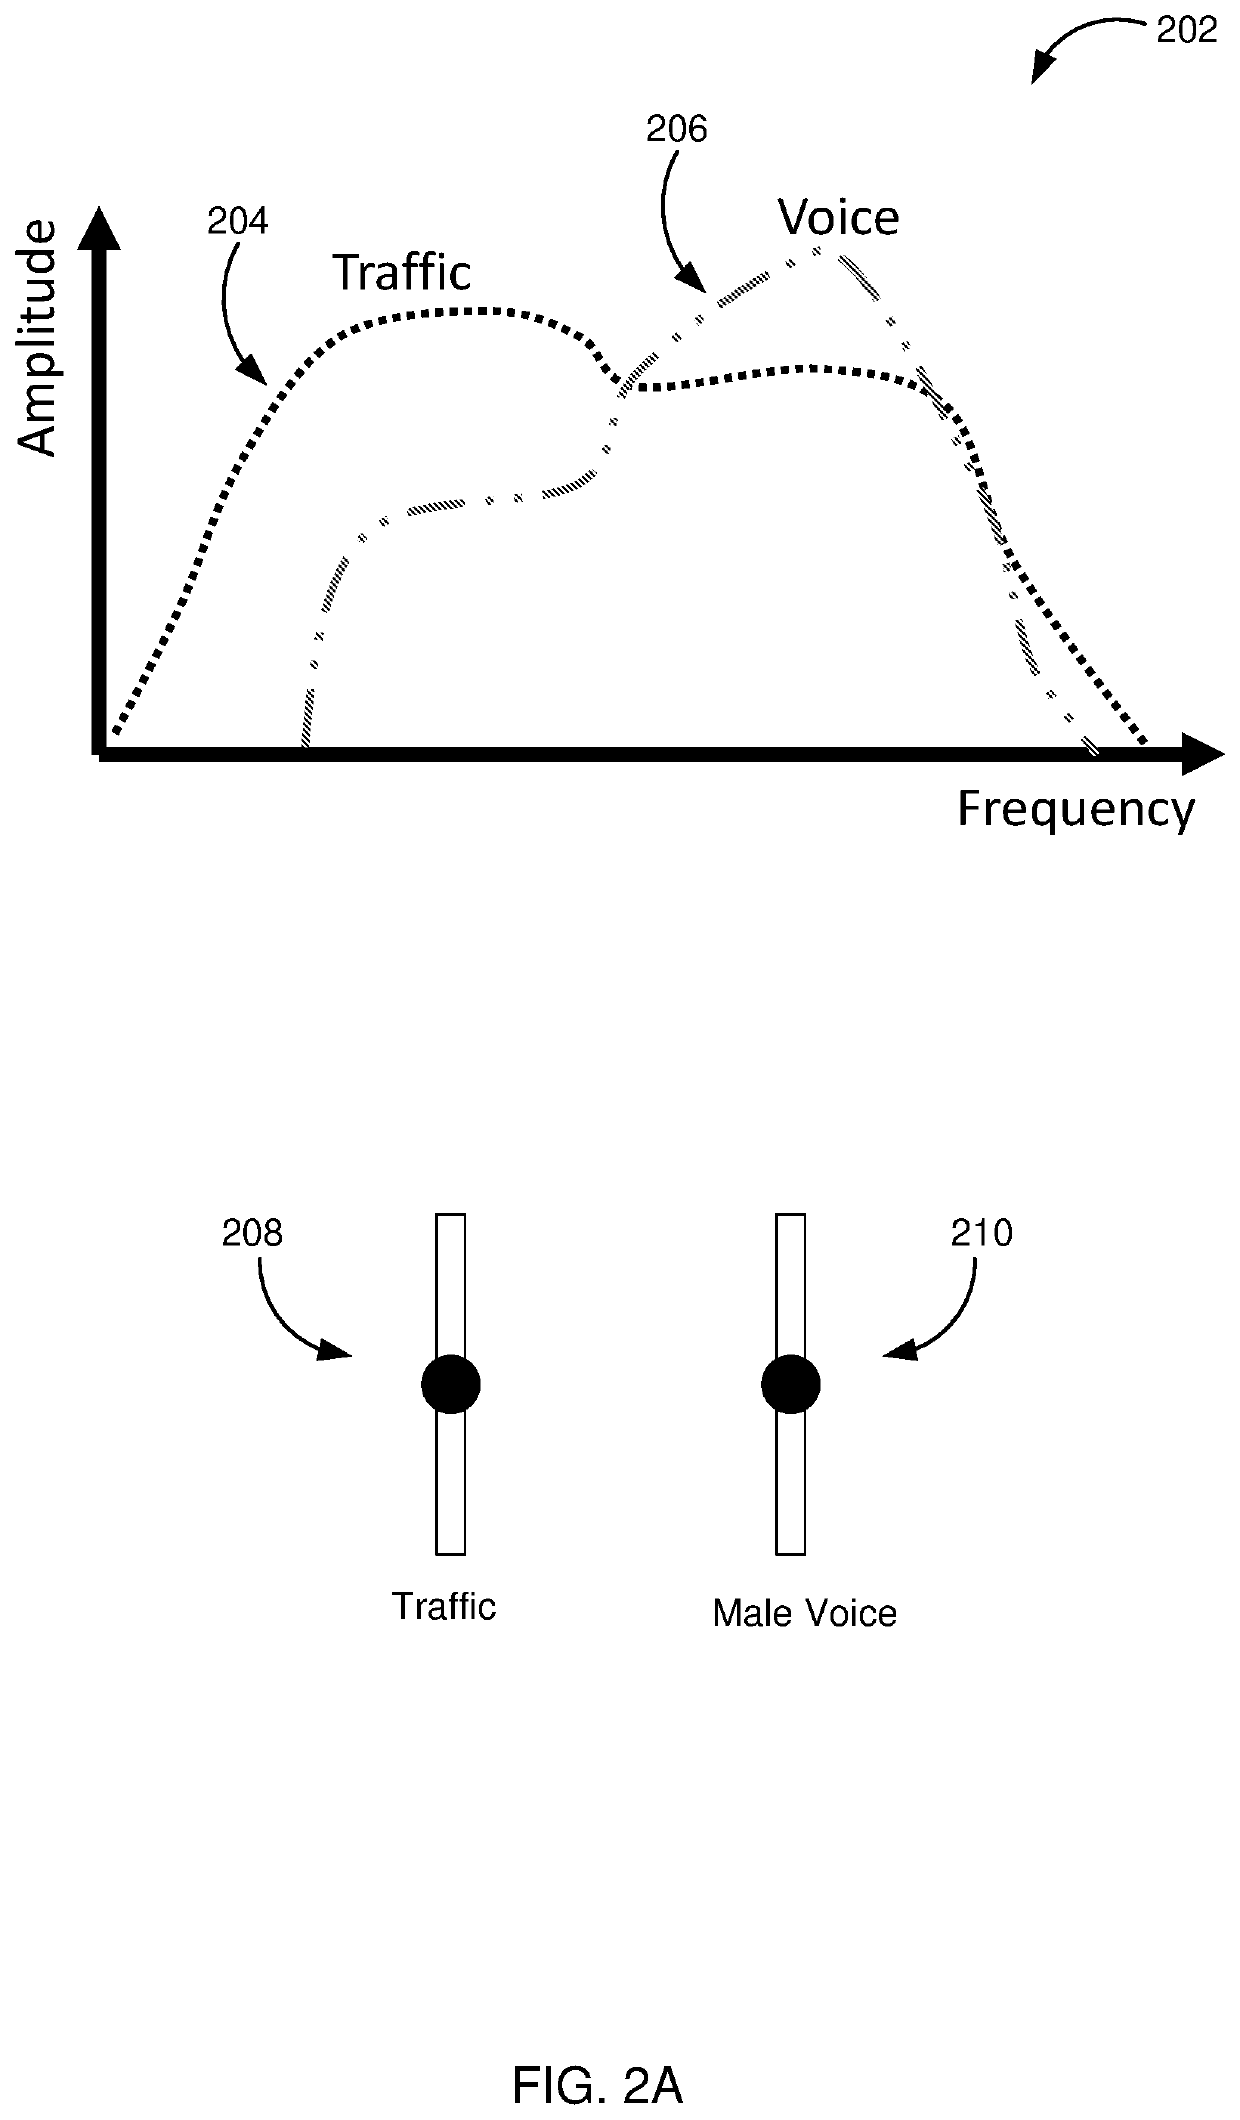 Sound modification based on frequency composition